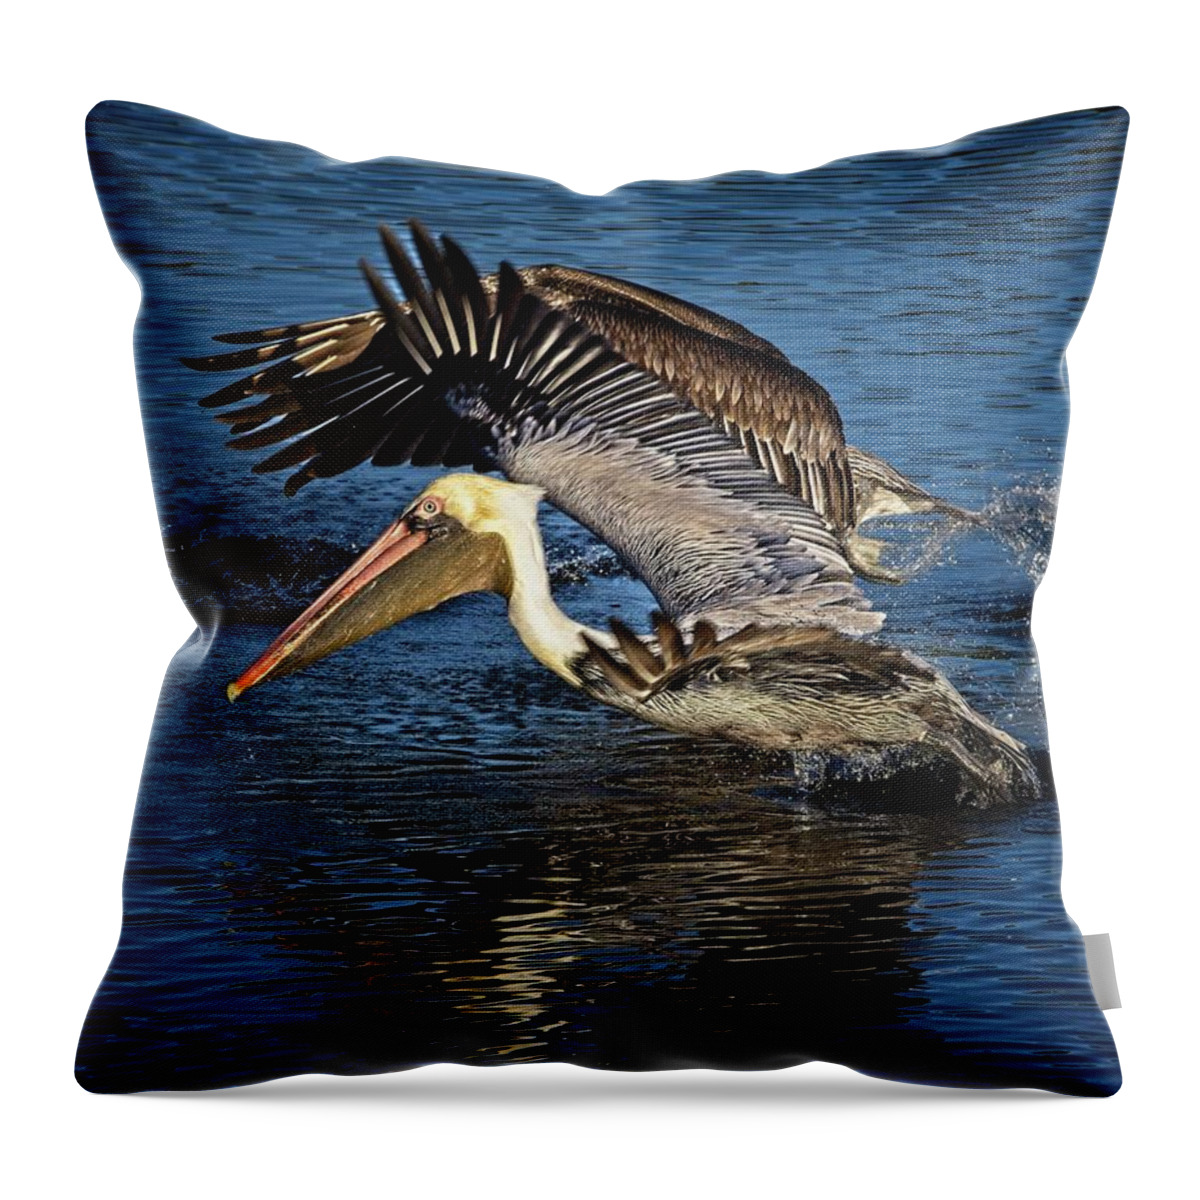 Brown Pelican Throw Pillow featuring the photograph We Have Liftoff by Ronald Lutz